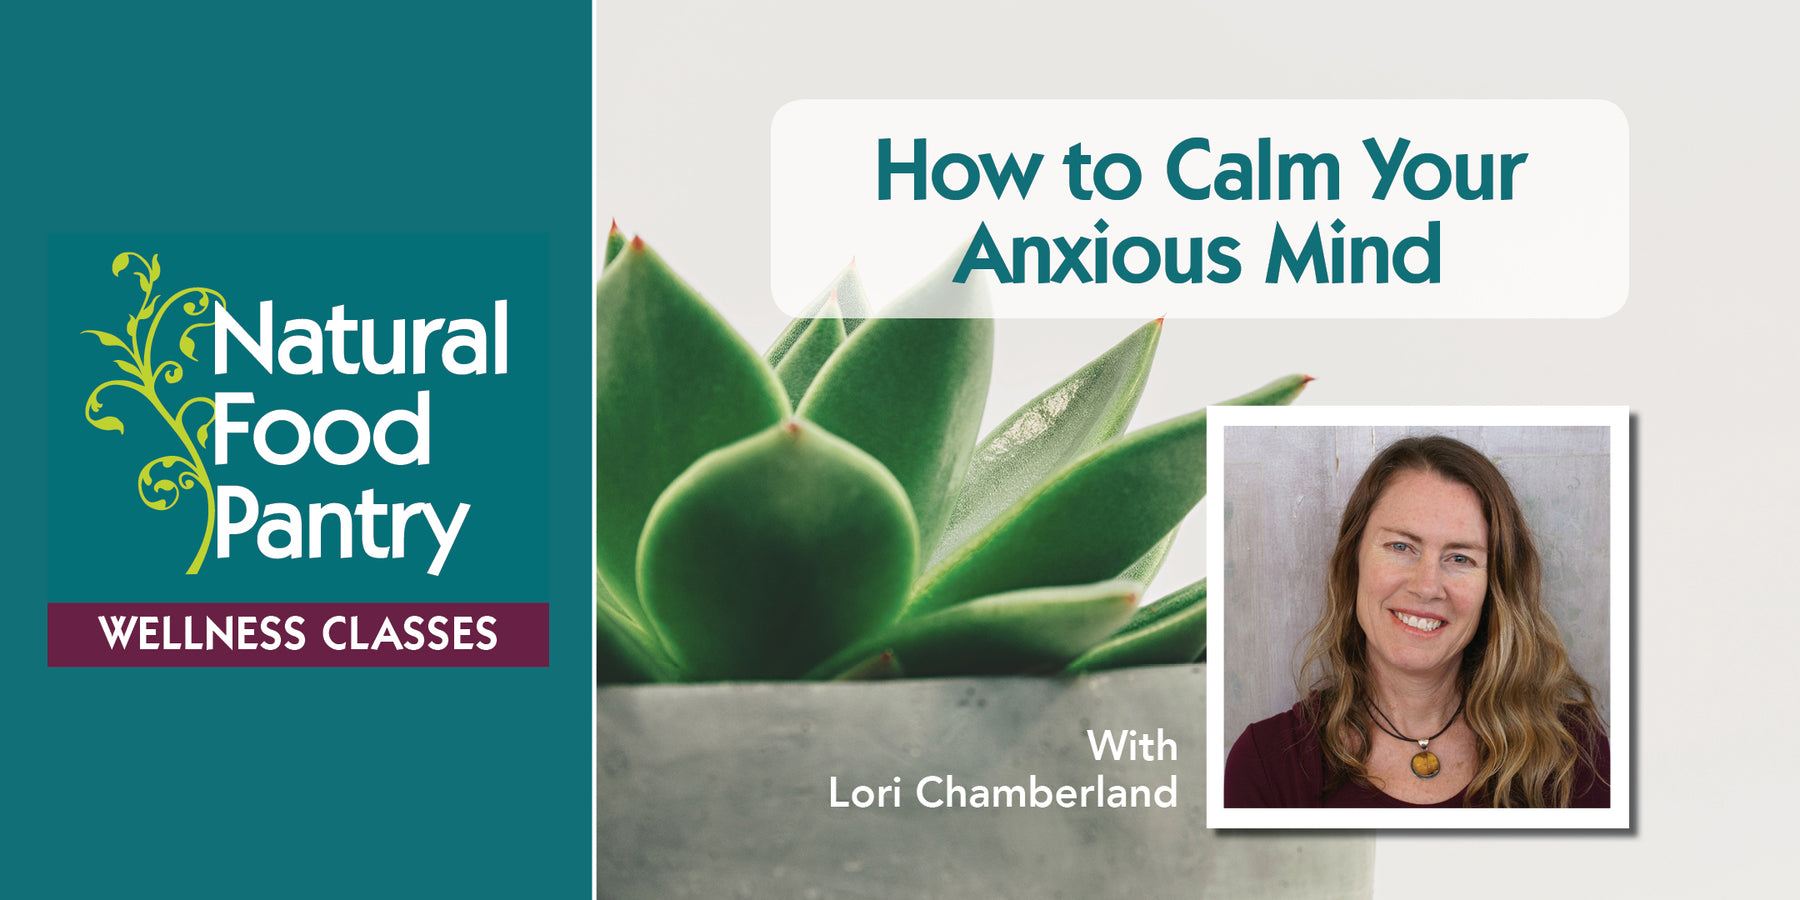 Mar 3: How to Calm Your Anxious Mind